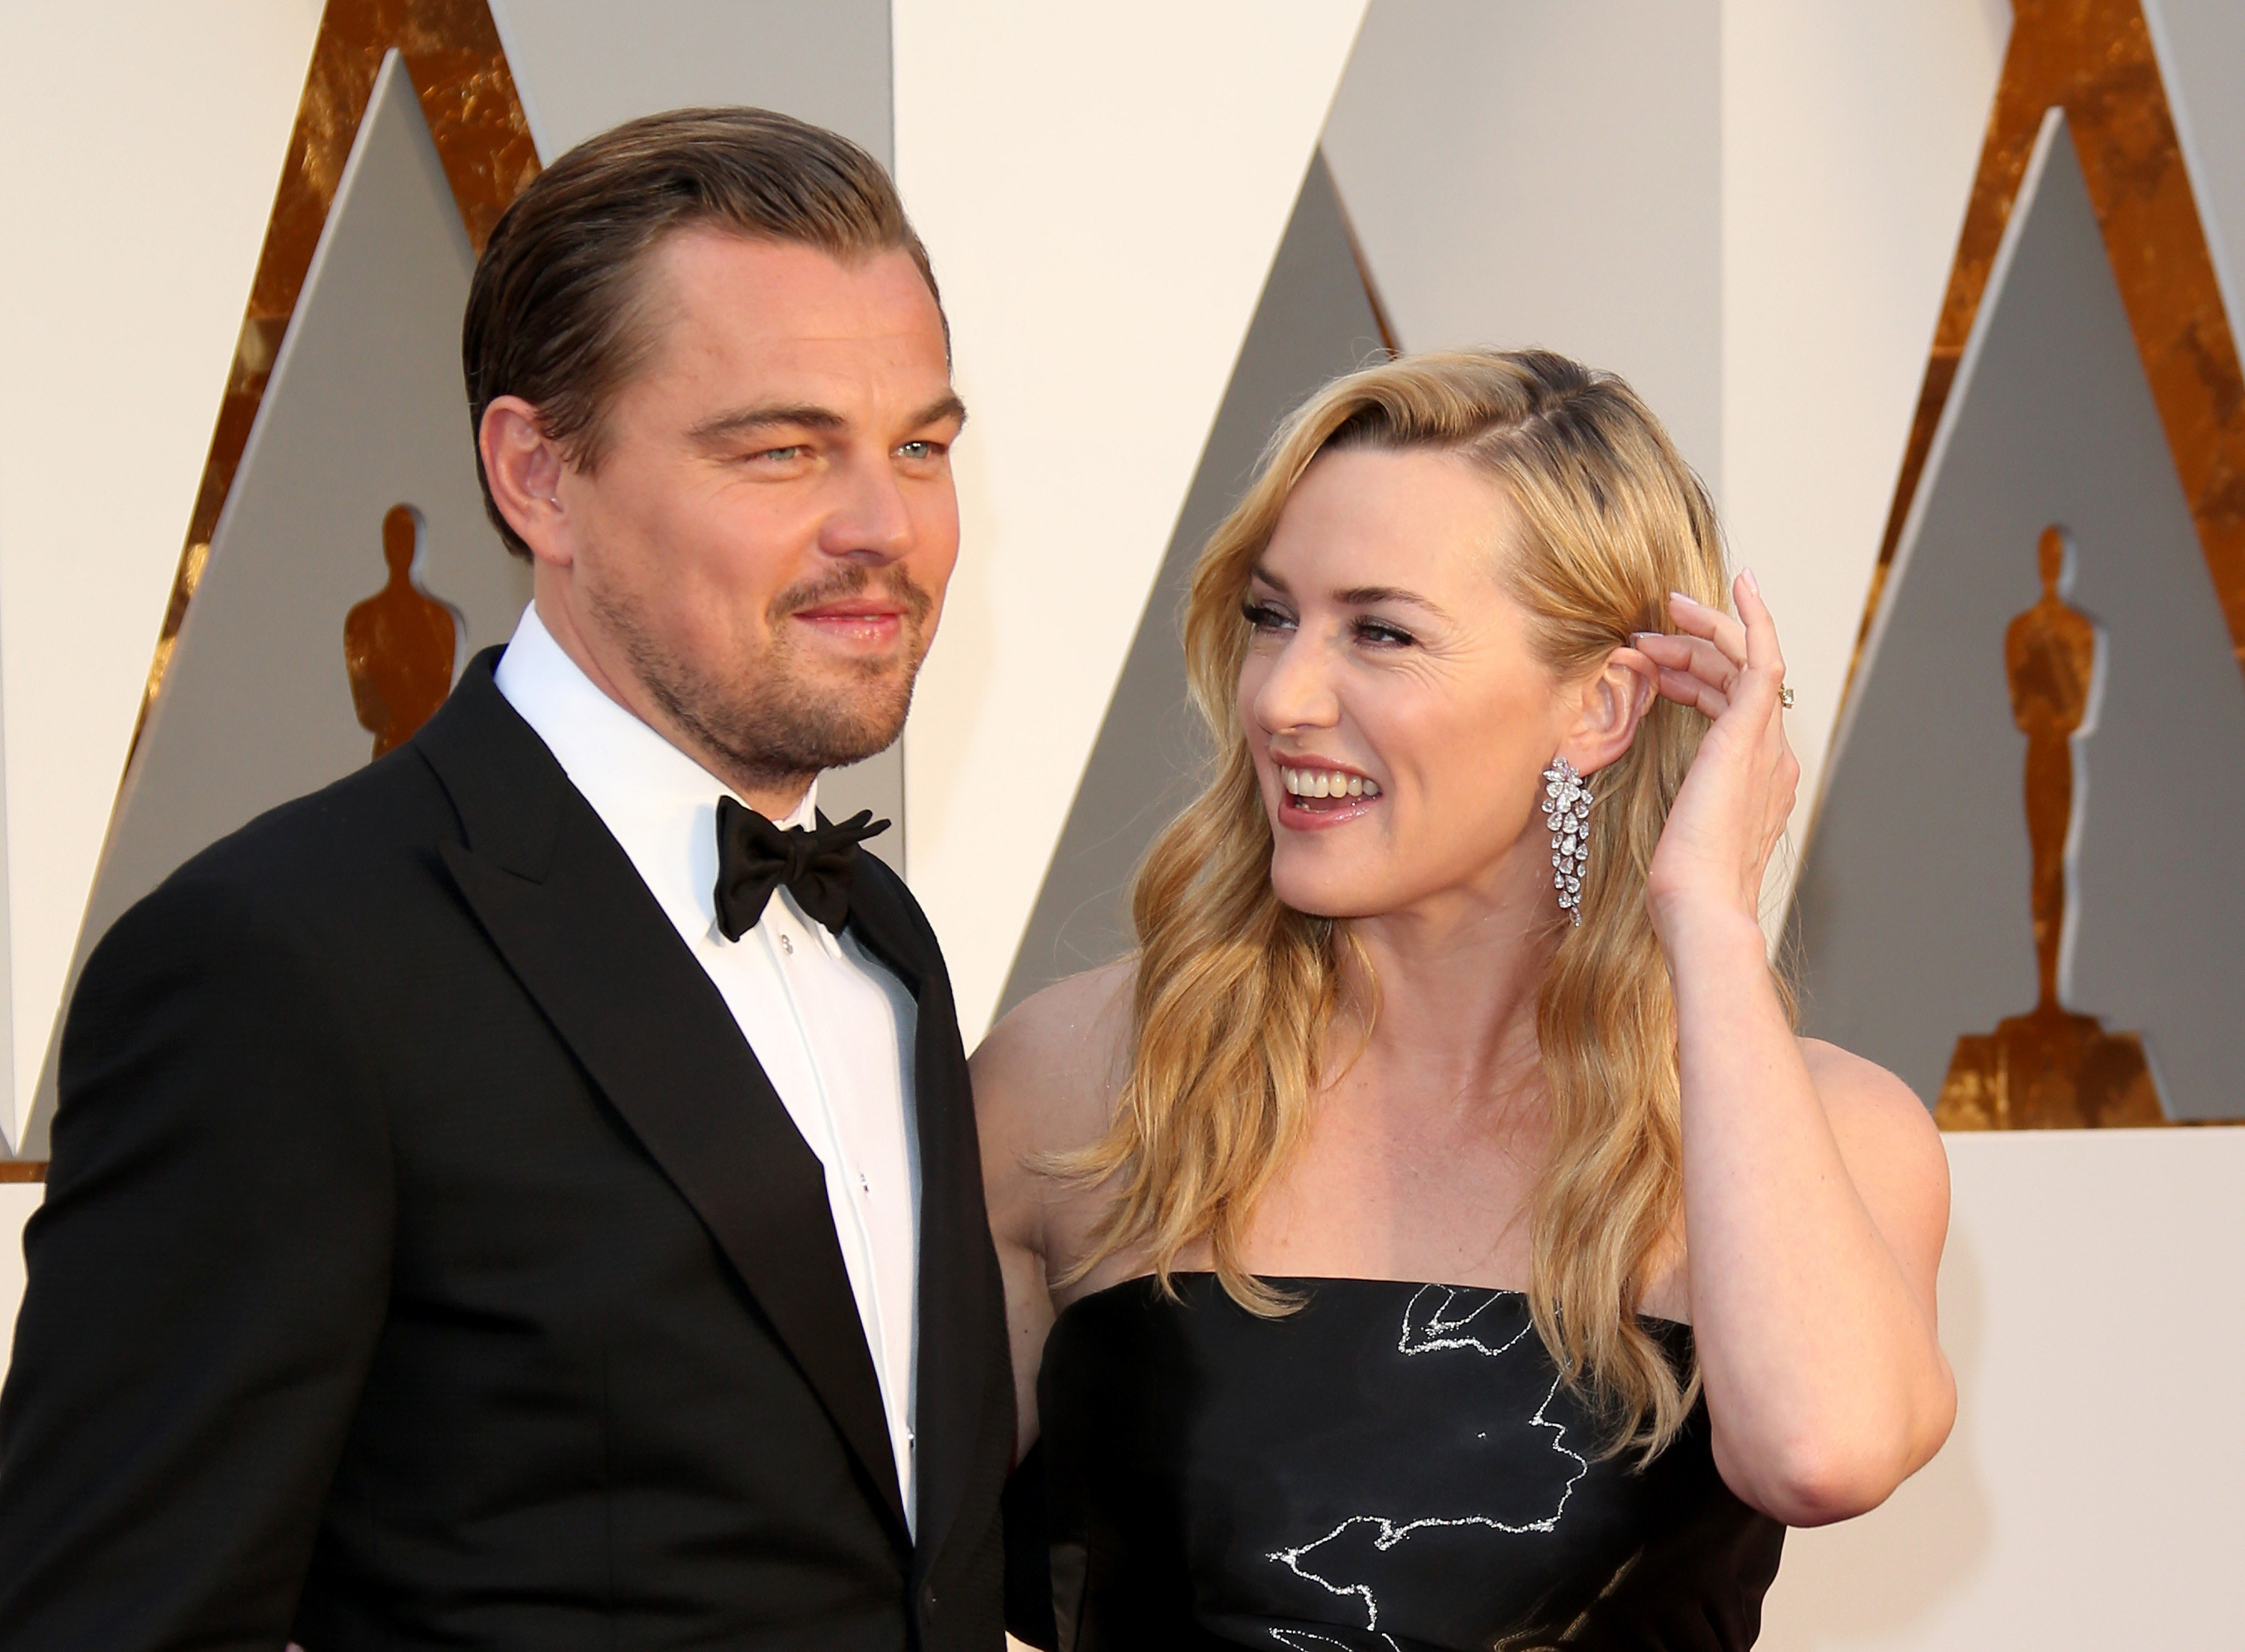 Photo of Leonardo DiCaprio and Kate Winslet smiling at an awards show